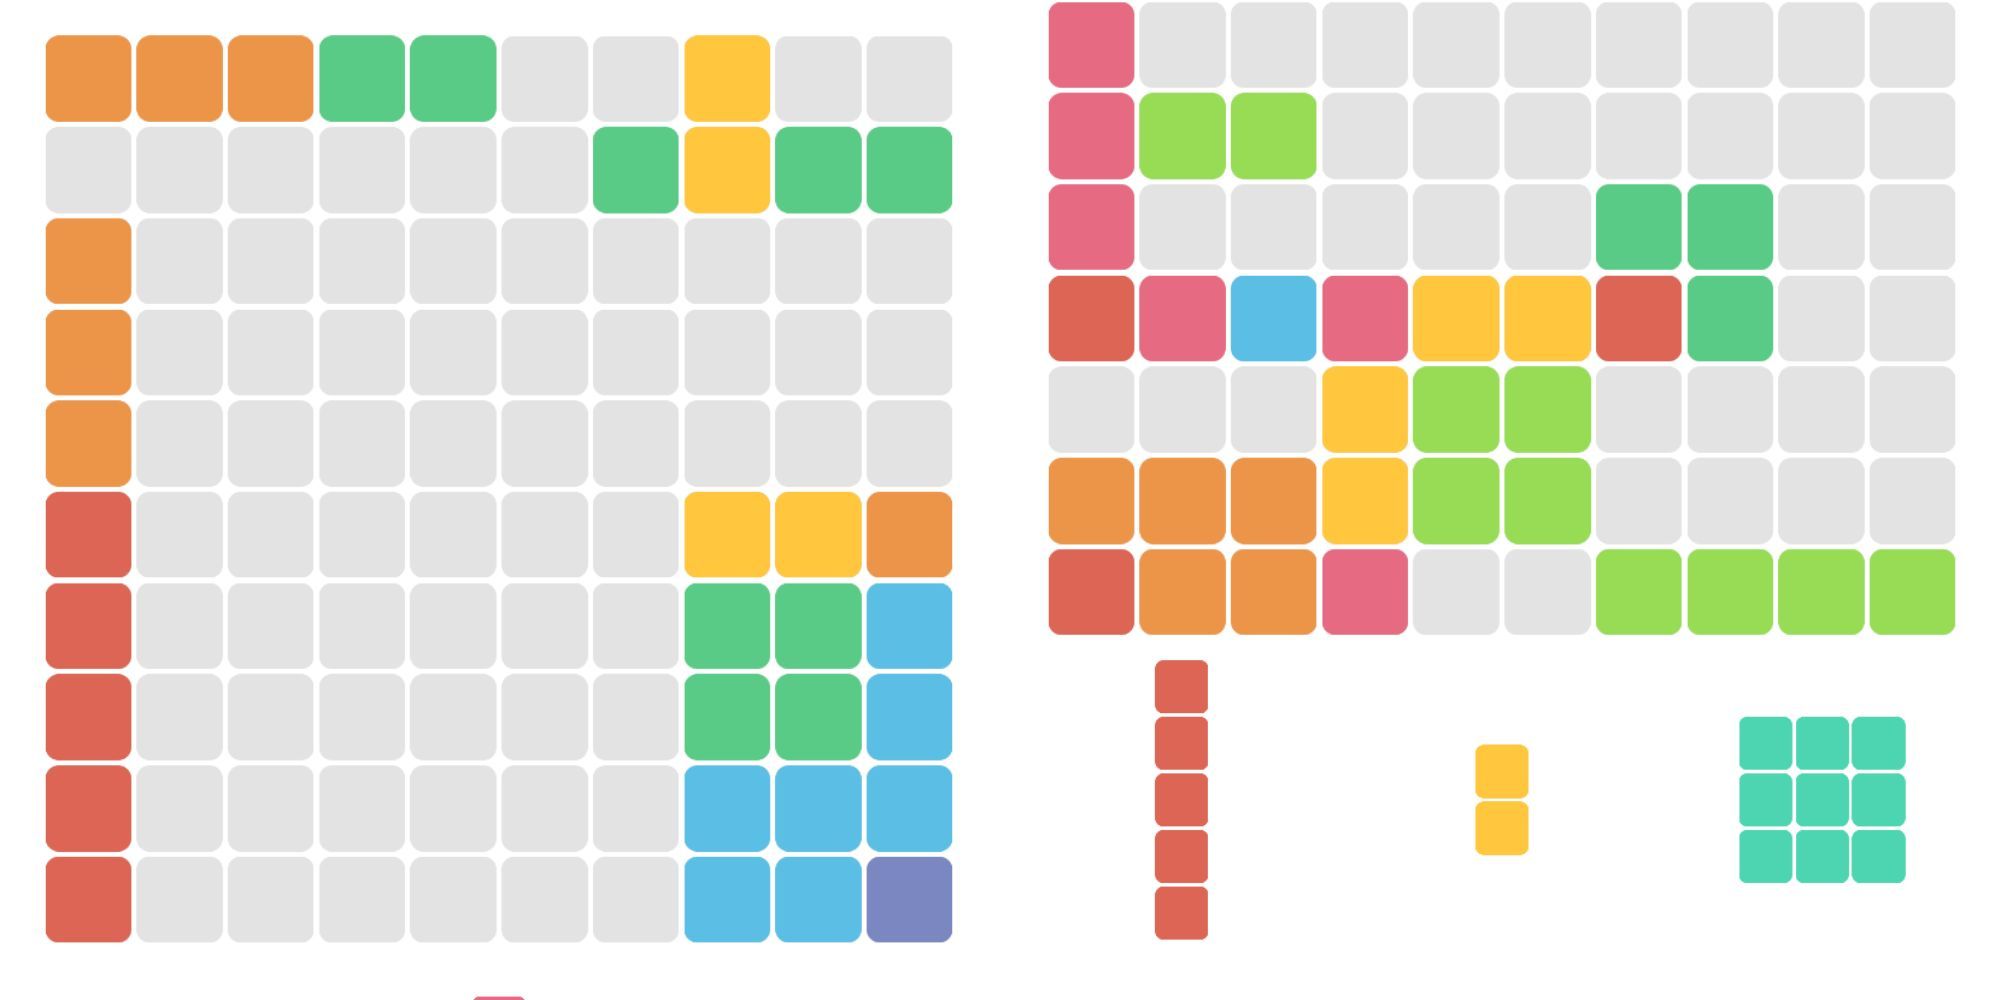 1010 - Two Examples Of The Game Board With Three Shapes To Pick From To Slot Into Grid